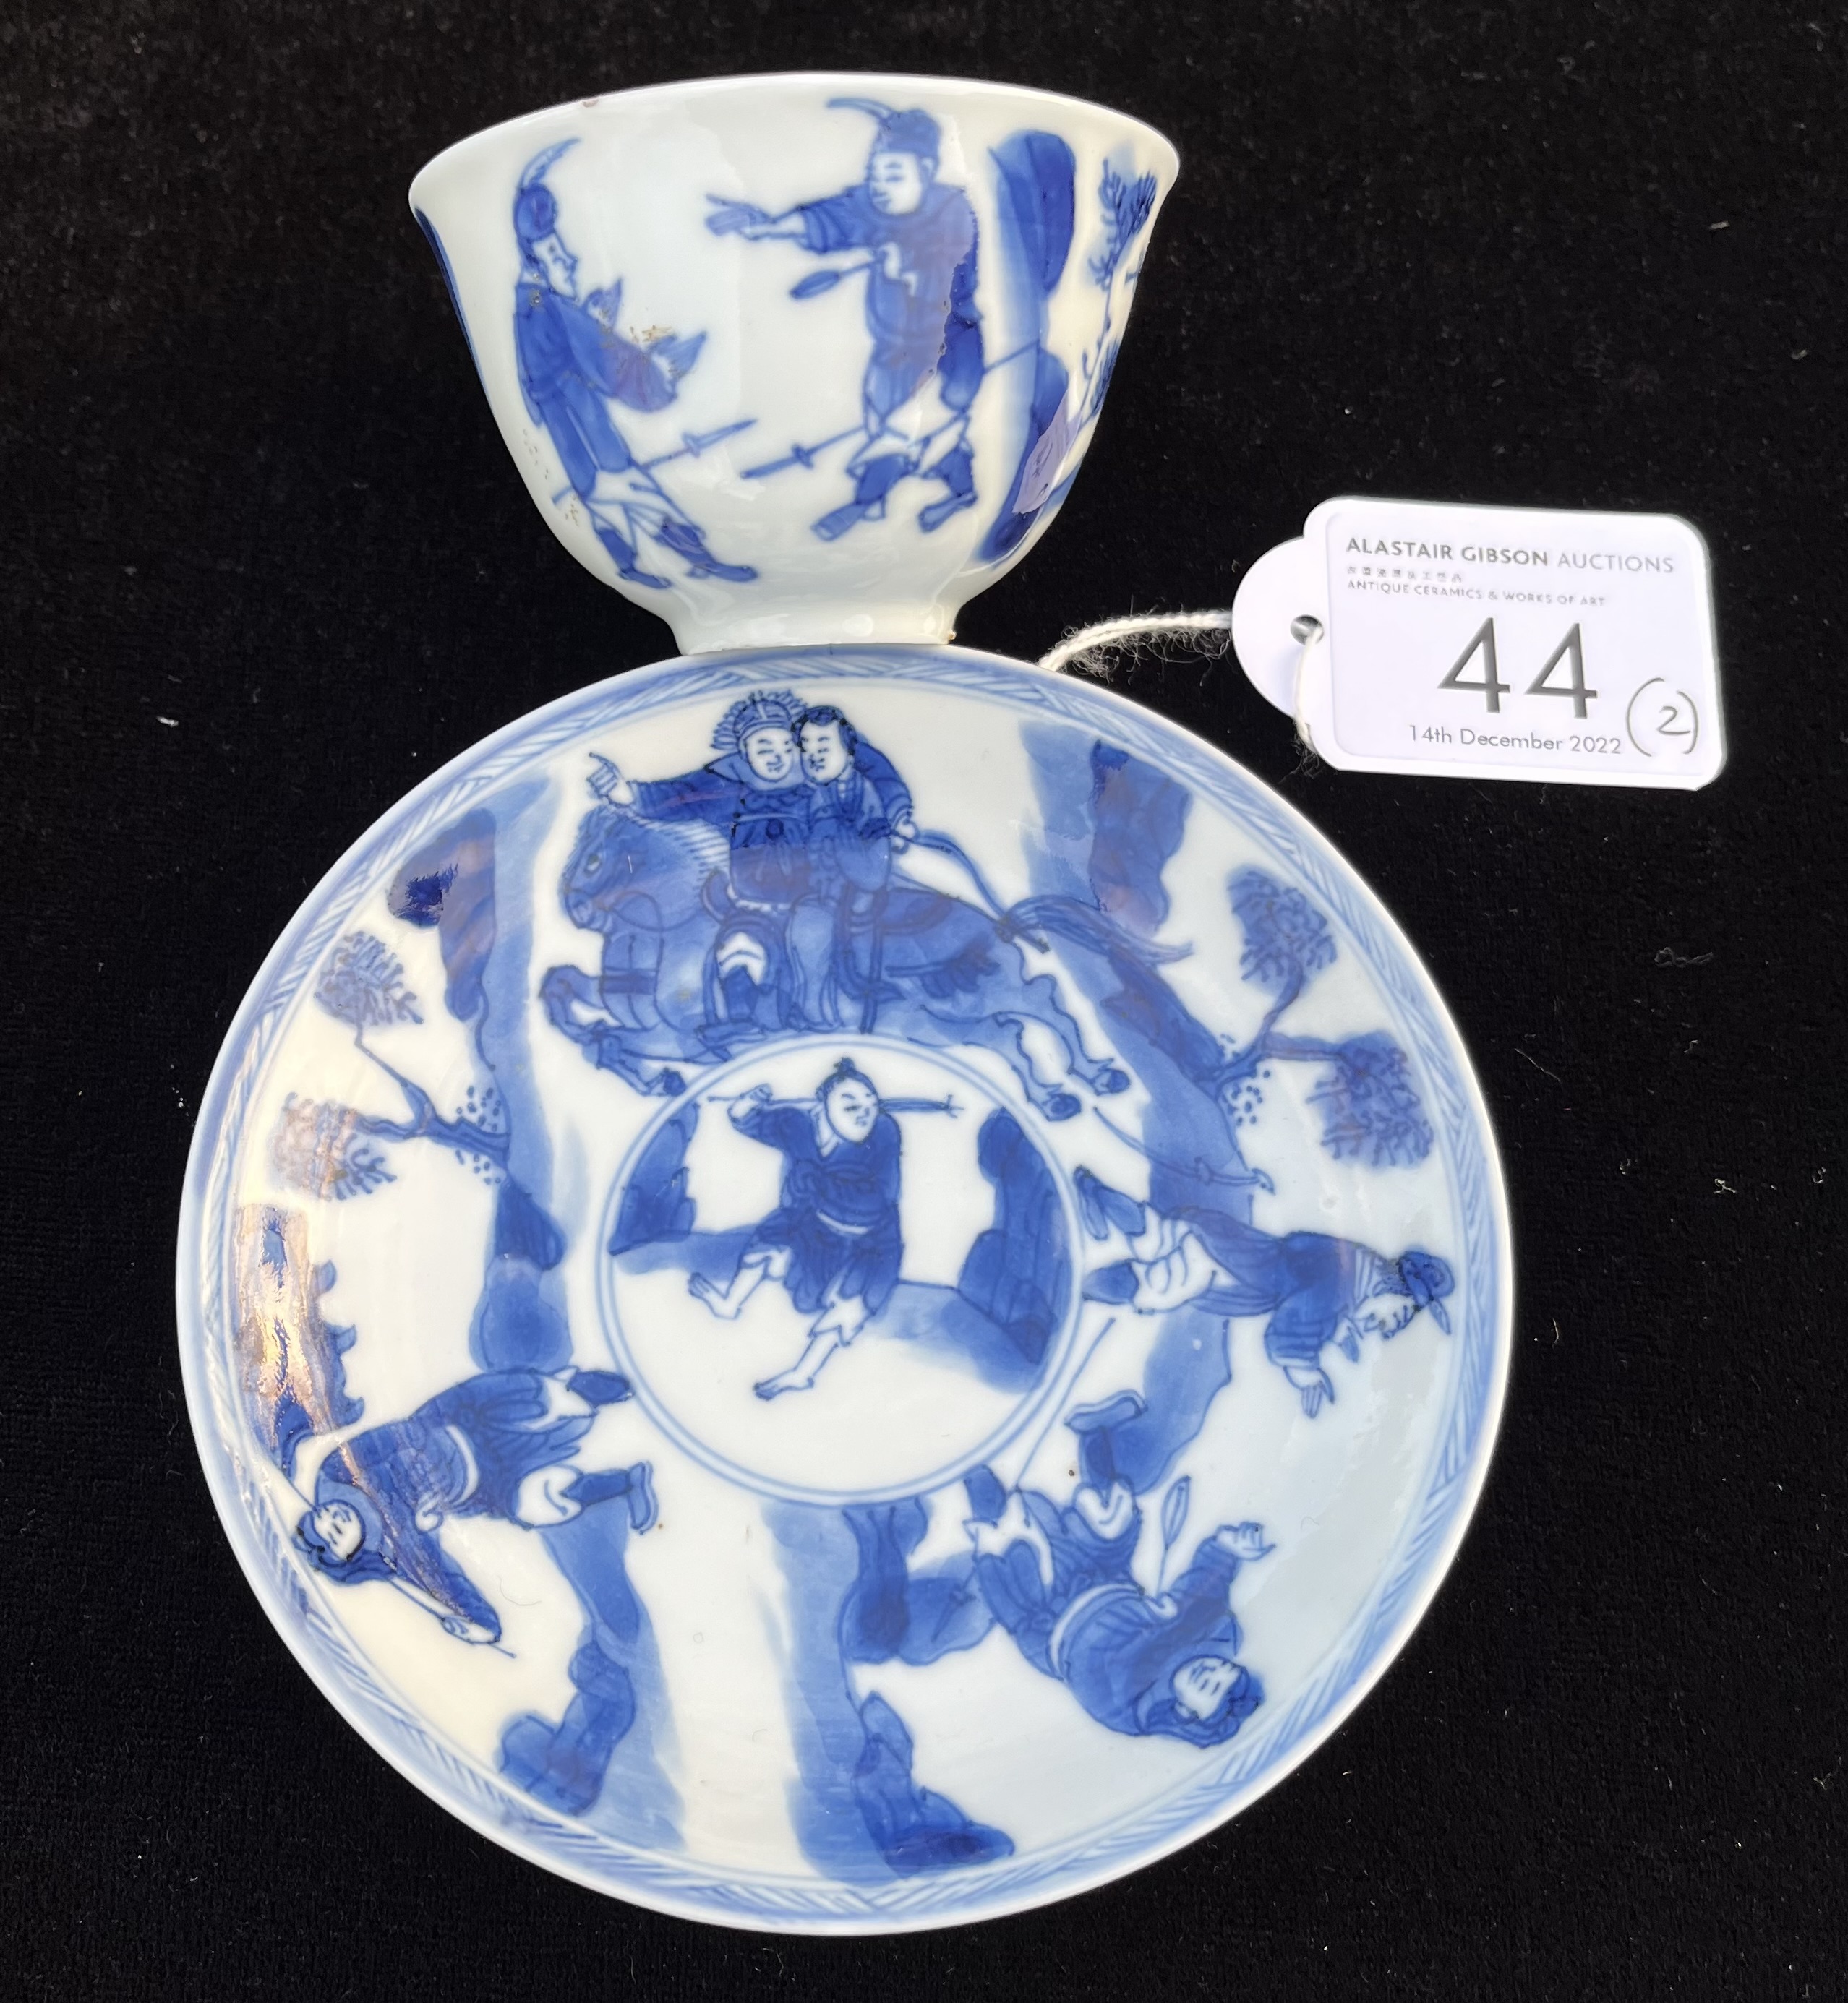 A CHINESE BLUE AND WHITE PORCELAIN TEA BOWL AND SAUCER, QING DYNASTY, KANGXI PERIOD, 1662 – 1722 - Image 2 of 7